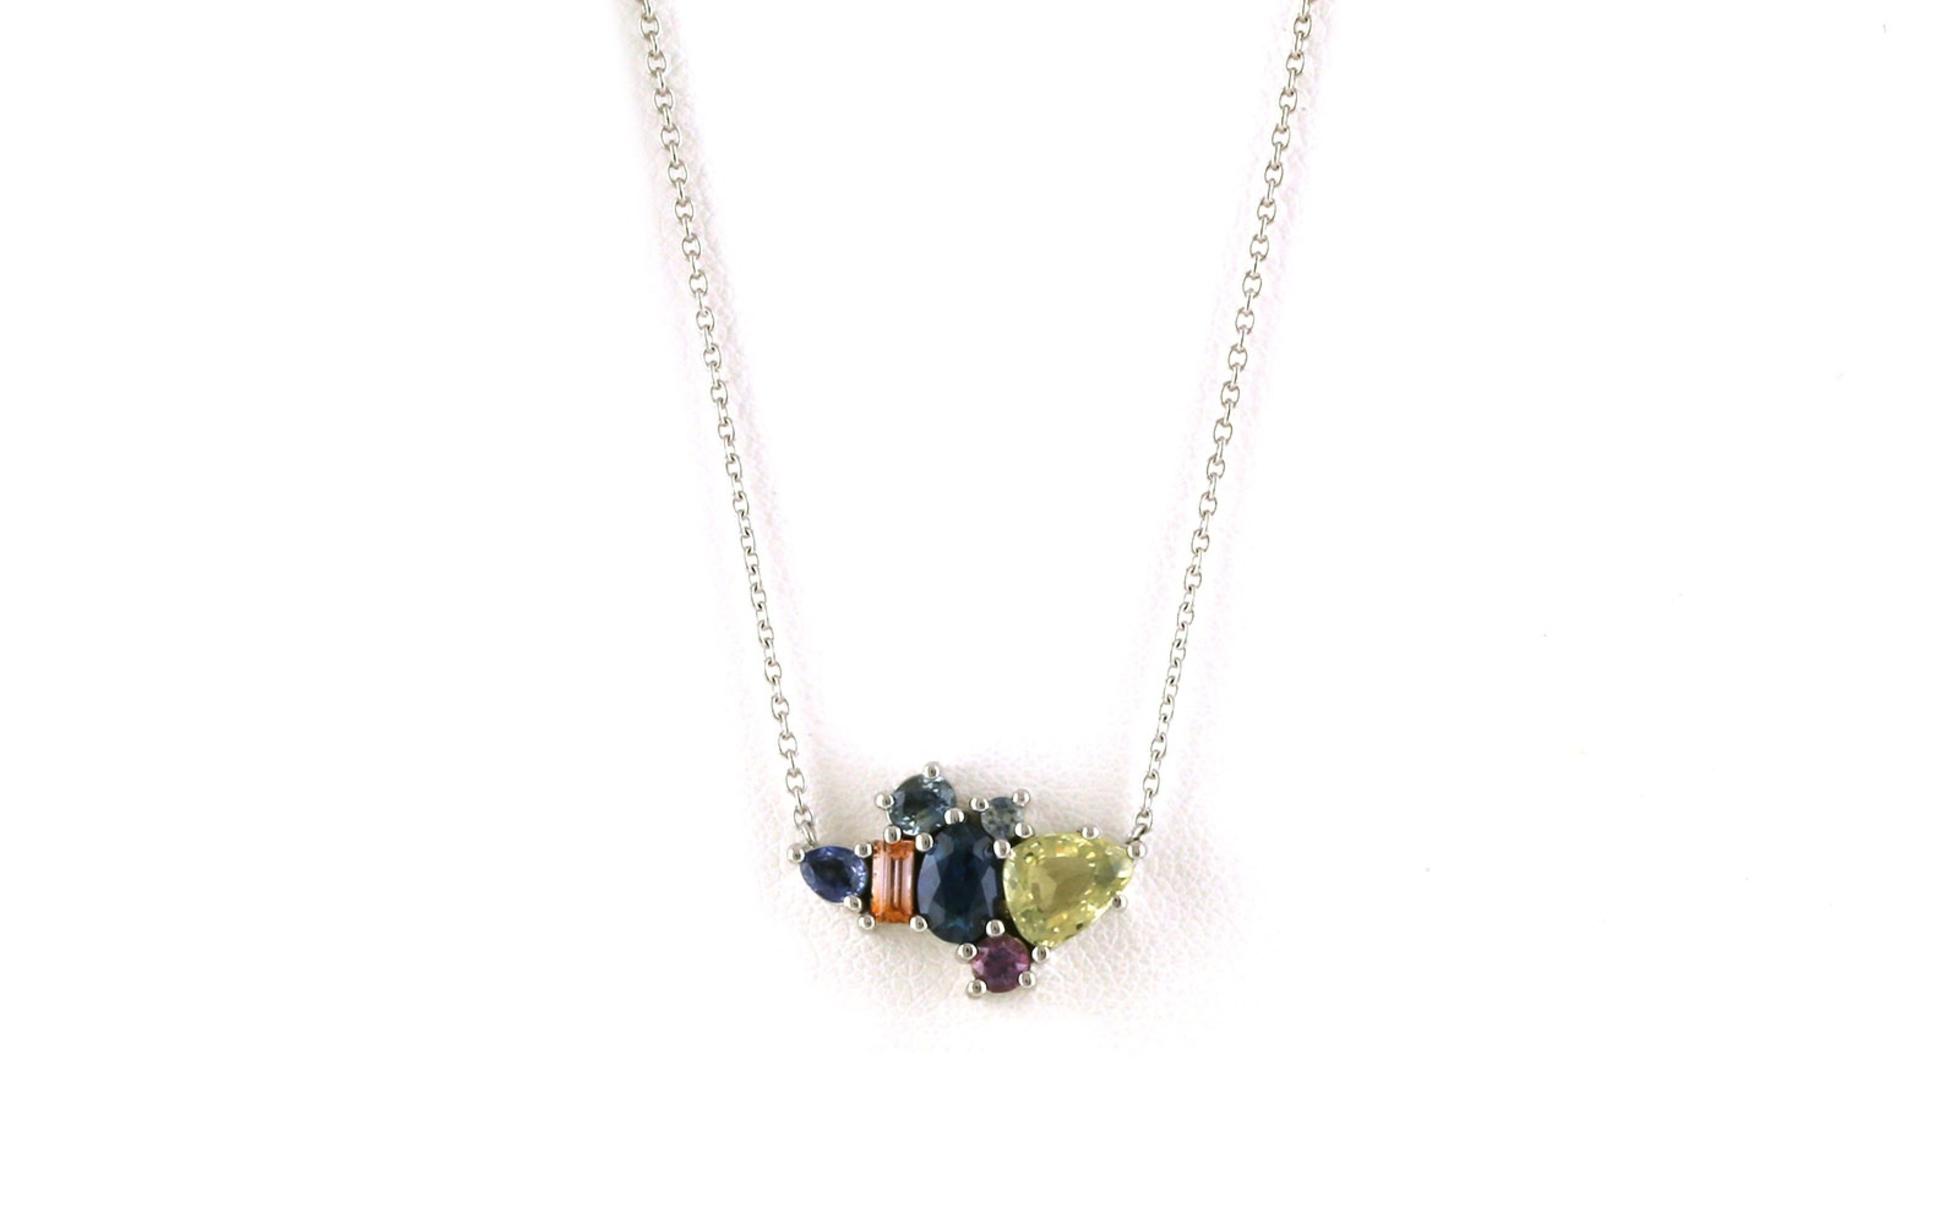 7-Stone Multi-color Multi-cut Montana Sapphire Cluster Necklace in White Gold (1.83cts TWT)